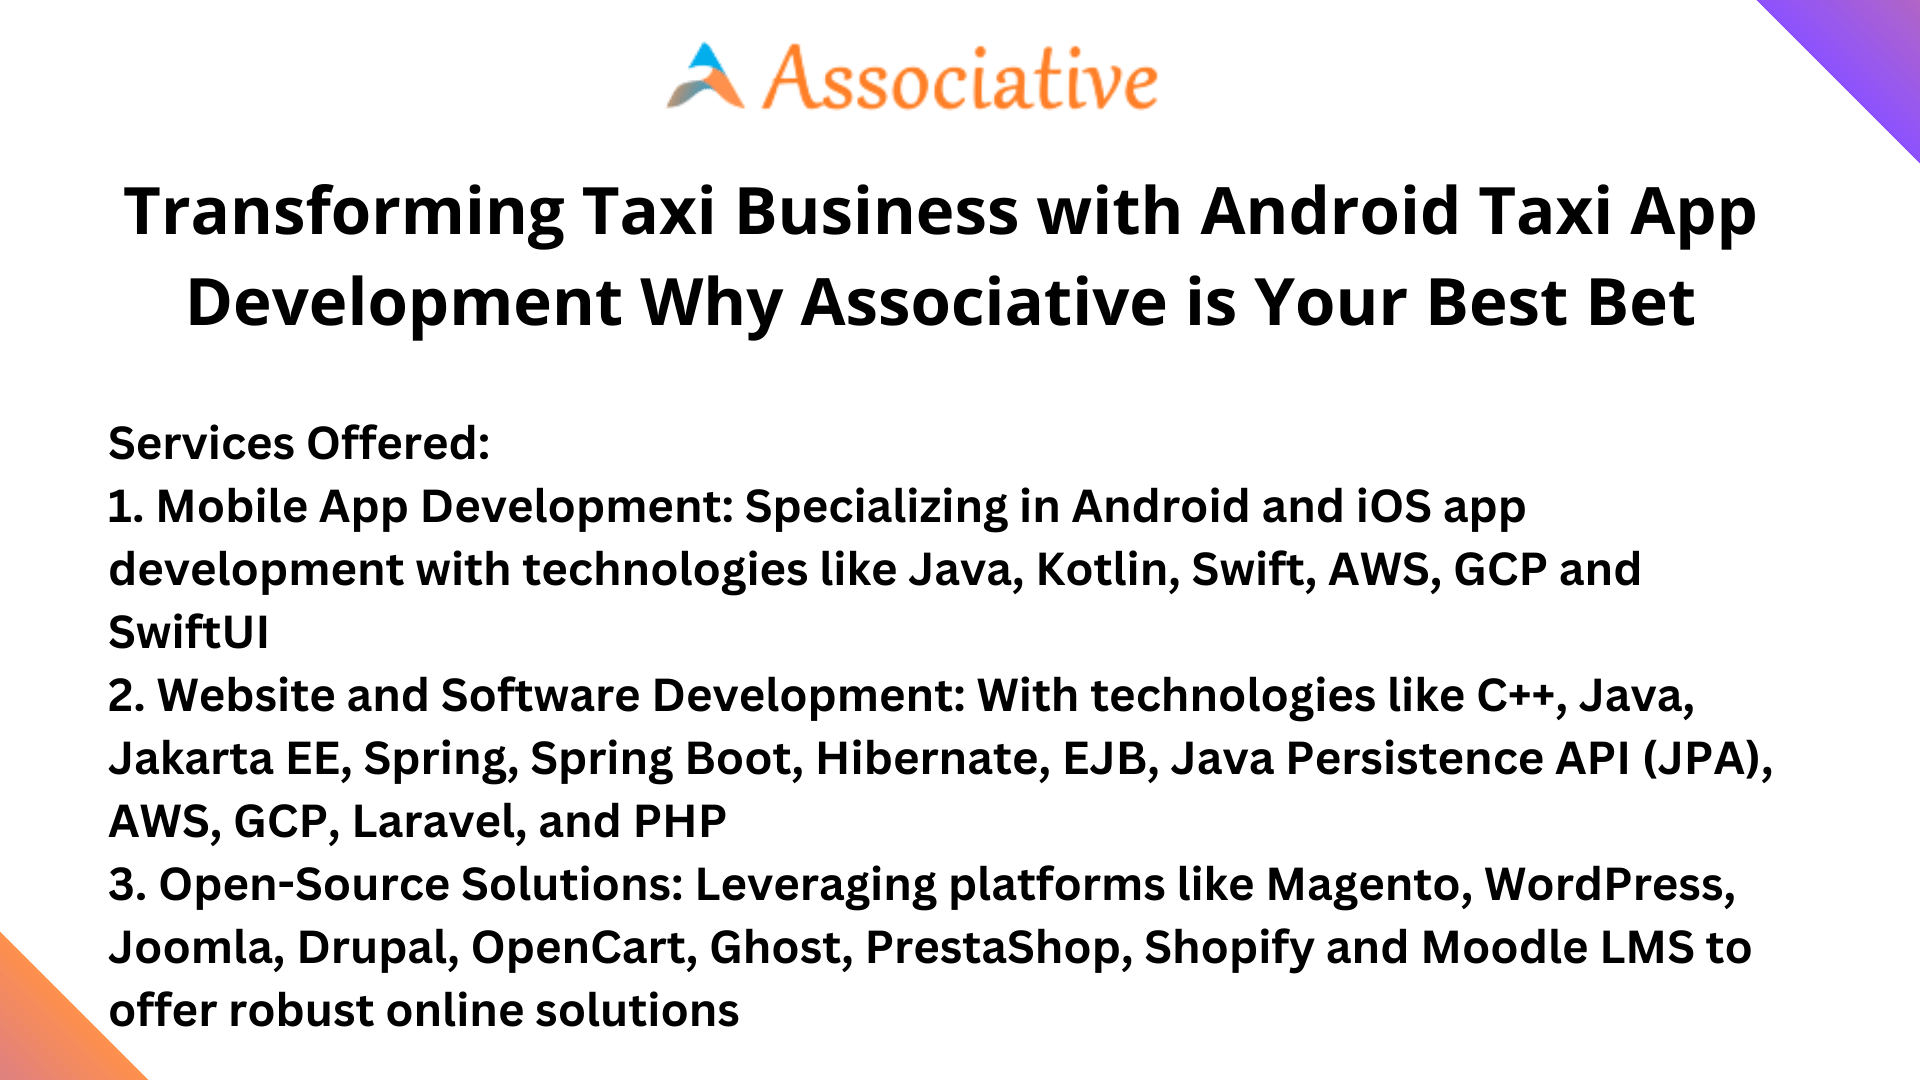 Transforming Taxi Business with Android Taxi App Development Why Associative is Your Best Bet